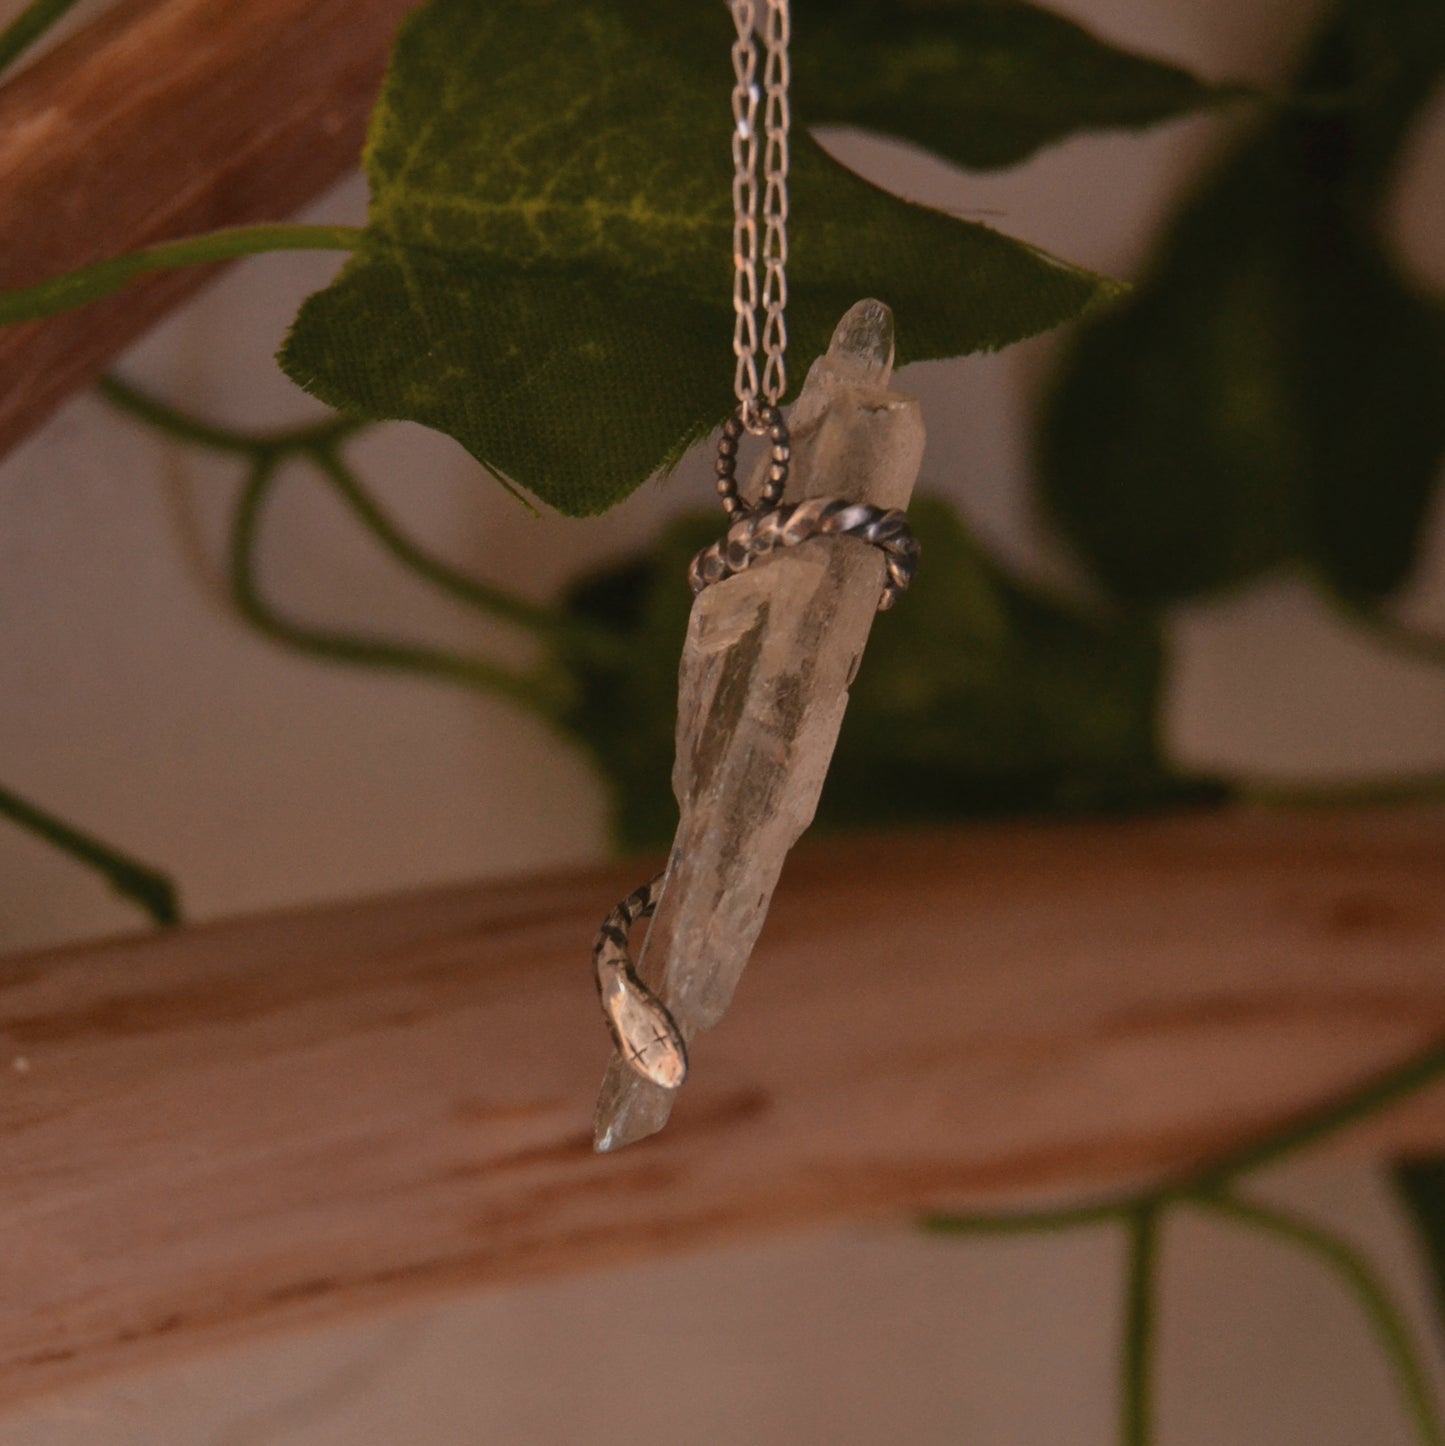 'Spirit' starry-eyed green amethyst snake pendant and chain necklace